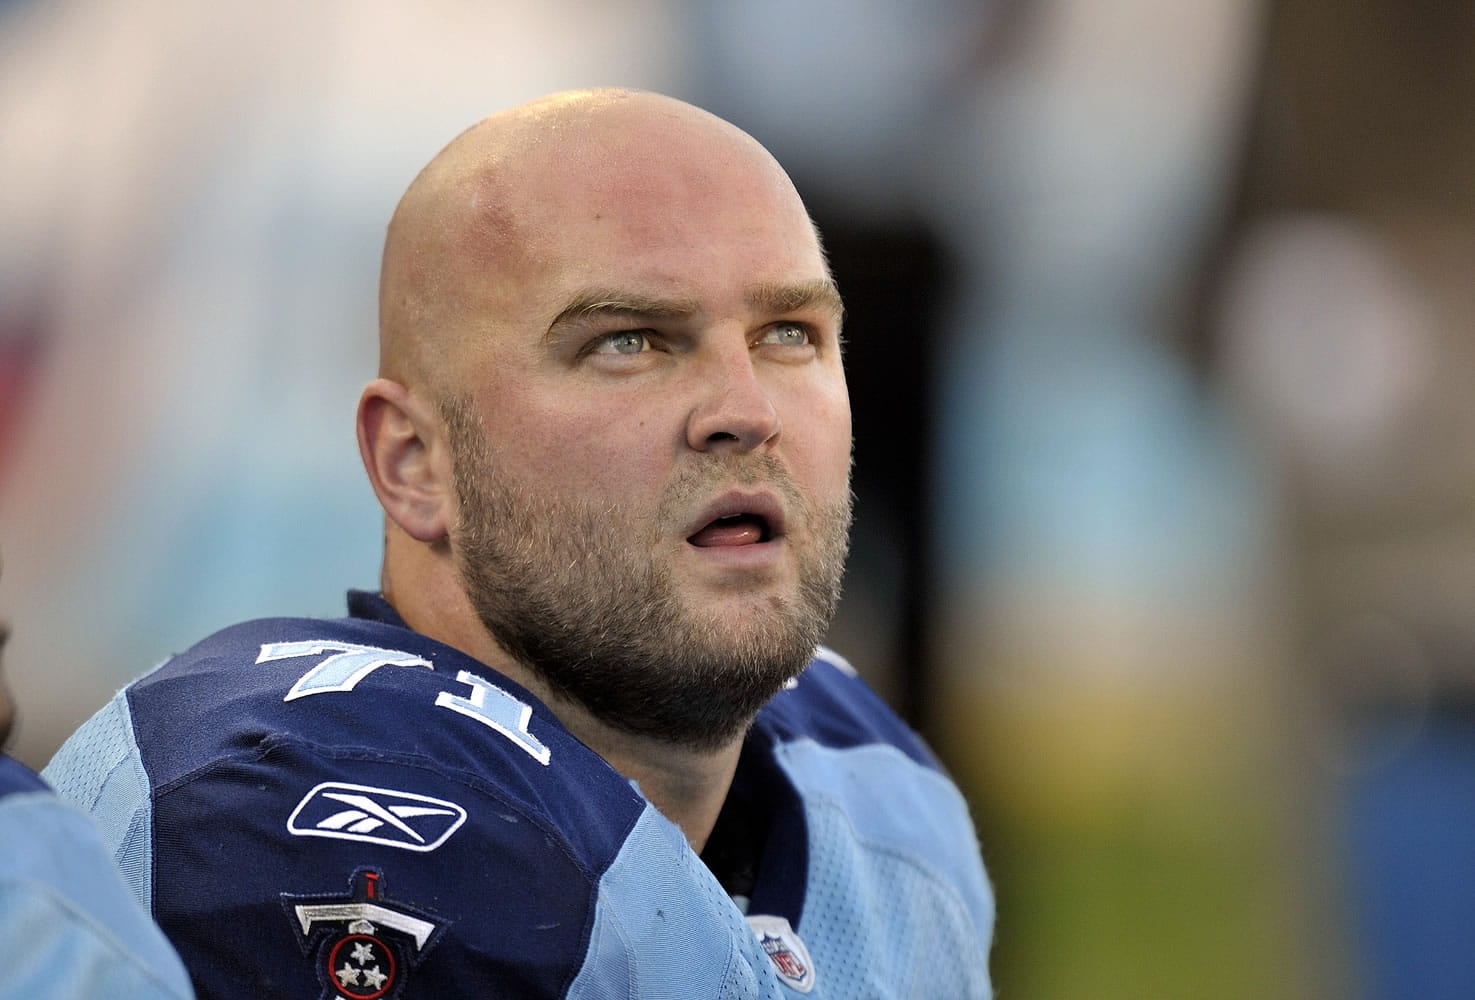 Tennessee Titans tackle Michael Roos, a graduate of Mountain View High School, announced Thursday, Feb. 26, 2015, that he will retire. Roos concludes his 10-year NFL career, all with the Titans, ranking 11th on the franchise list of games played with 148.